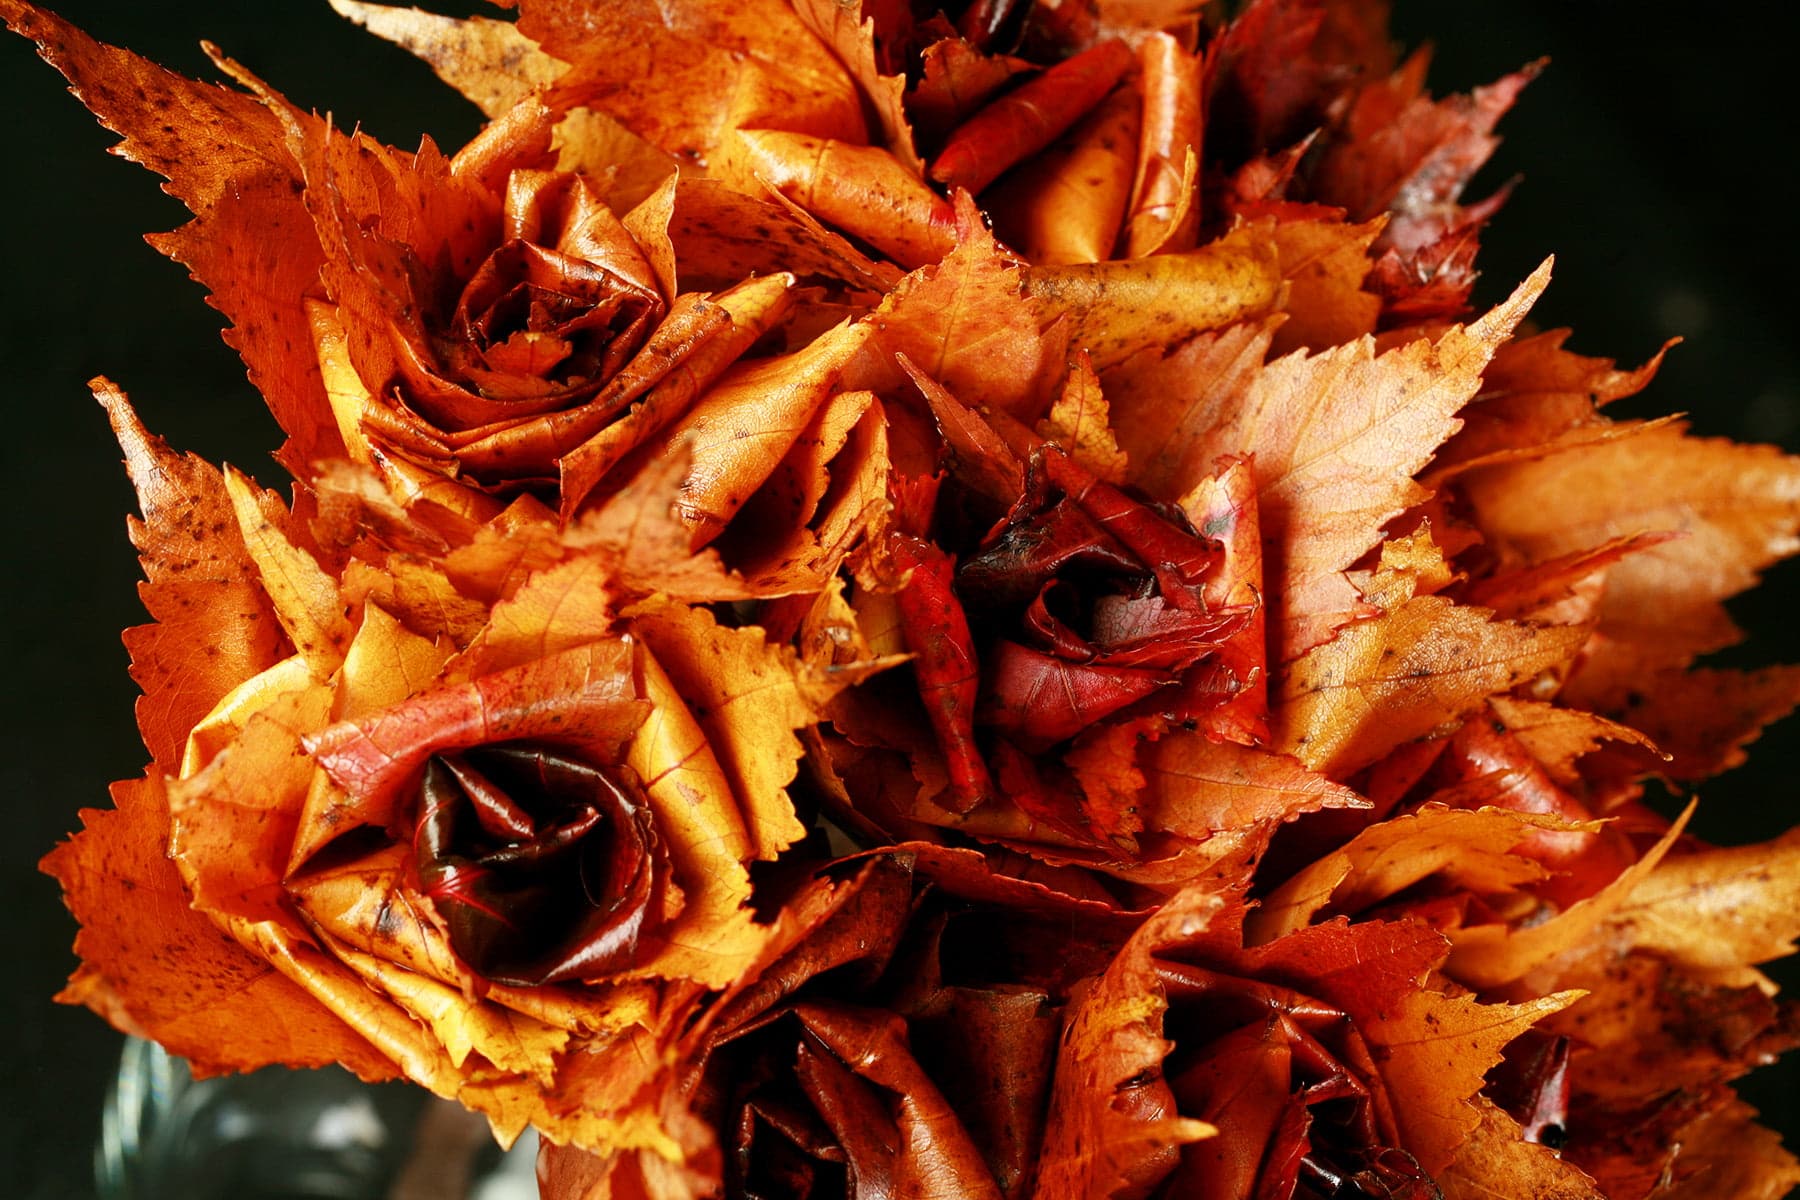 A bouquet of Maple Leaf Roses - roses that have been handcrafted from freshly fallen maple leaves.